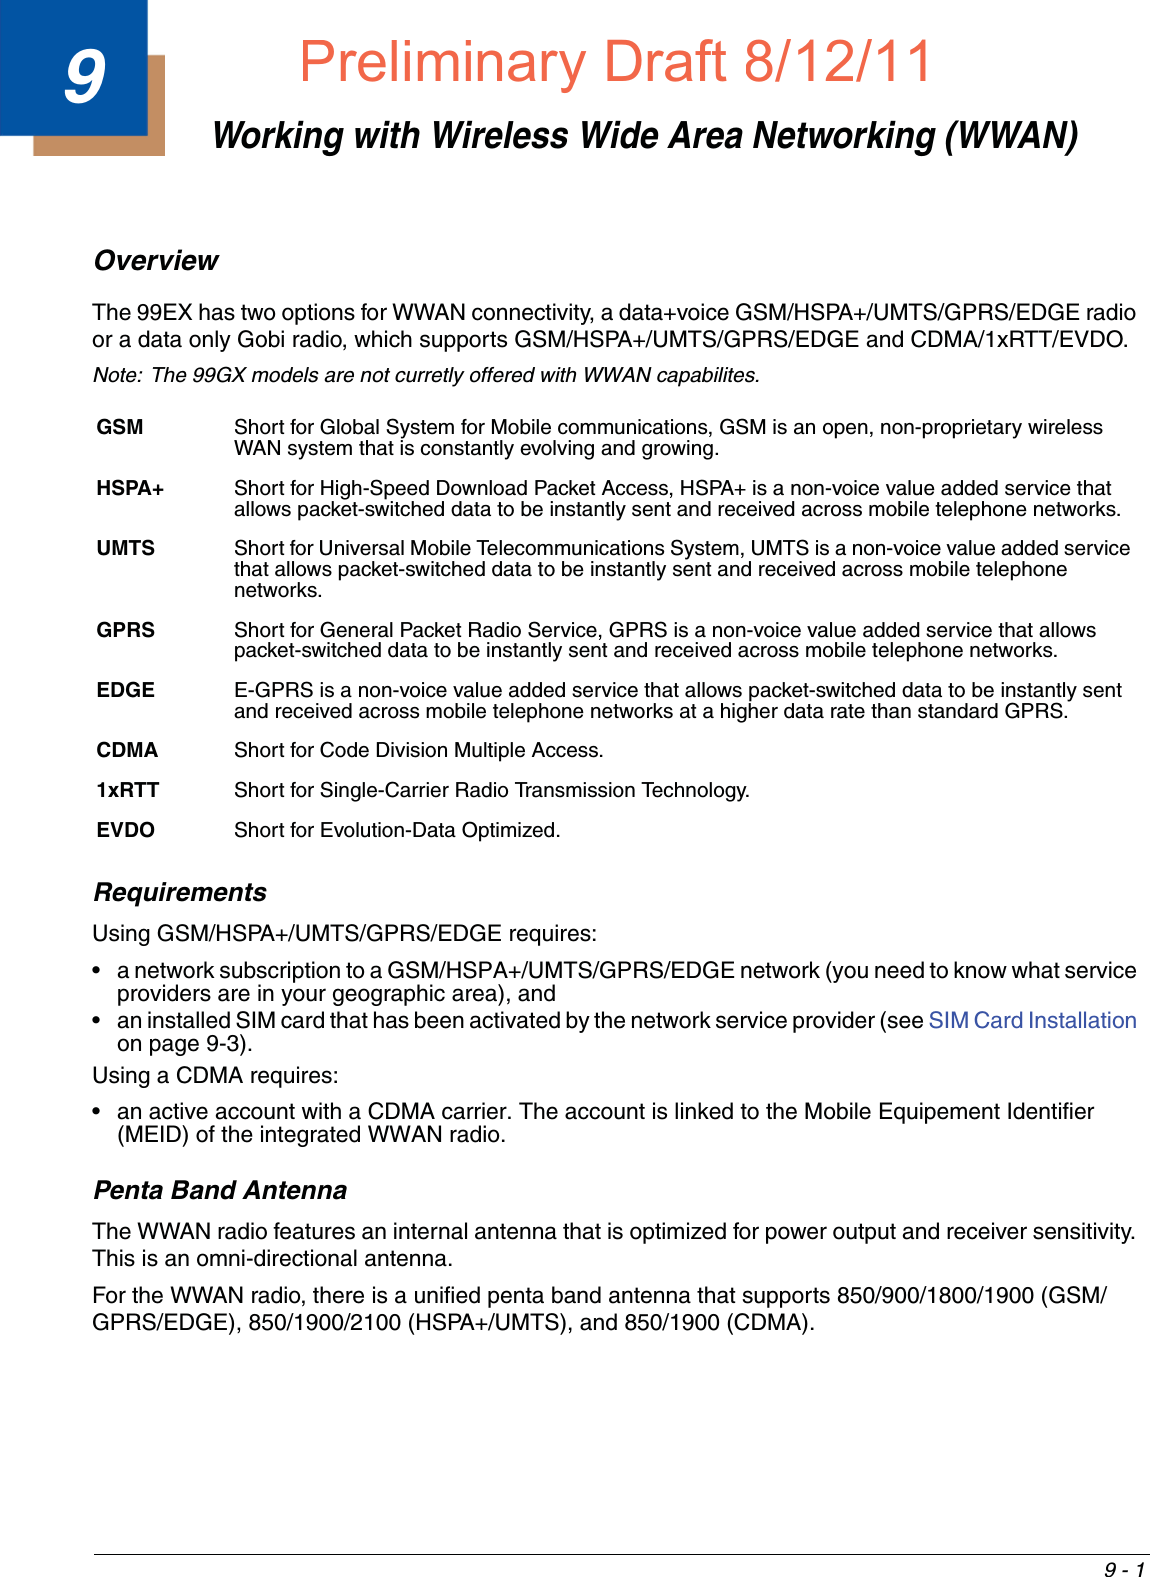 9 - 19Working with Wireless Wide Area Networking (WWAN)Overview The 99EX has two options for WWAN connectivity, a data+voice GSM/HSPA+/UMTS/GPRS/EDGE radio or a data only Gobi radio, which supports GSM/HSPA+/UMTS/GPRS/EDGE and CDMA/1xRTT/EVDO.Note: The 99GX models are not curretly offered with WWAN capabilites.RequirementsUsing GSM/HSPA+/UMTS/GPRS/EDGE requires:• a network subscription to a GSM/HSPA+/UMTS/GPRS/EDGE network (you need to know what service providers are in your geographic area), and• an installed SIM card that has been activated by the network service provider (see SIM Card Installation on page 9-3).Using a CDMA requires:• an active account with a CDMA carrier. The account is linked to the Mobile Equipement Identifier (MEID) of the integrated WWAN radio.Penta Band AntennaThe WWAN radio features an internal antenna that is optimized for power output and receiver sensitivity. This is an omni-directional antenna. For the WWAN radio, there is a unified penta band antenna that supports 850/900/1800/1900 (GSM/GPRS/EDGE), 850/1900/2100 (HSPA+/UMTS), and 850/1900 (CDMA). GSM  Short for Global System for Mobile communications, GSM is an open, non-proprietary wireless WAN system that is constantly evolving and growing. HSPA+ Short for High-Speed Download Packet Access, HSPA+ is a non-voice value added service that allows packet-switched data to be instantly sent and received across mobile telephone networks.UMTS Short for Universal Mobile Telecommunications System, UMTS is a non-voice value added service that allows packet-switched data to be instantly sent and received across mobile telephone networks.GPRS  Short for General Packet Radio Service, GPRS is a non-voice value added service that allows packet-switched data to be instantly sent and received across mobile telephone networks.EDGE E-GPRS is a non-voice value added service that allows packet-switched data to be instantly sent and received across mobile telephone networks at a higher data rate than standard GPRS.CDMA Short for Code Division Multiple Access.1xRTT Short for Single-Carrier Radio Transmission Technology.EVDO Short for Evolution-Data Optimized.Preliminary Draft8/12/11Draft_99EX-UG_Rev-b-1.pdf   111 8/12/2011   4:13:52 PM